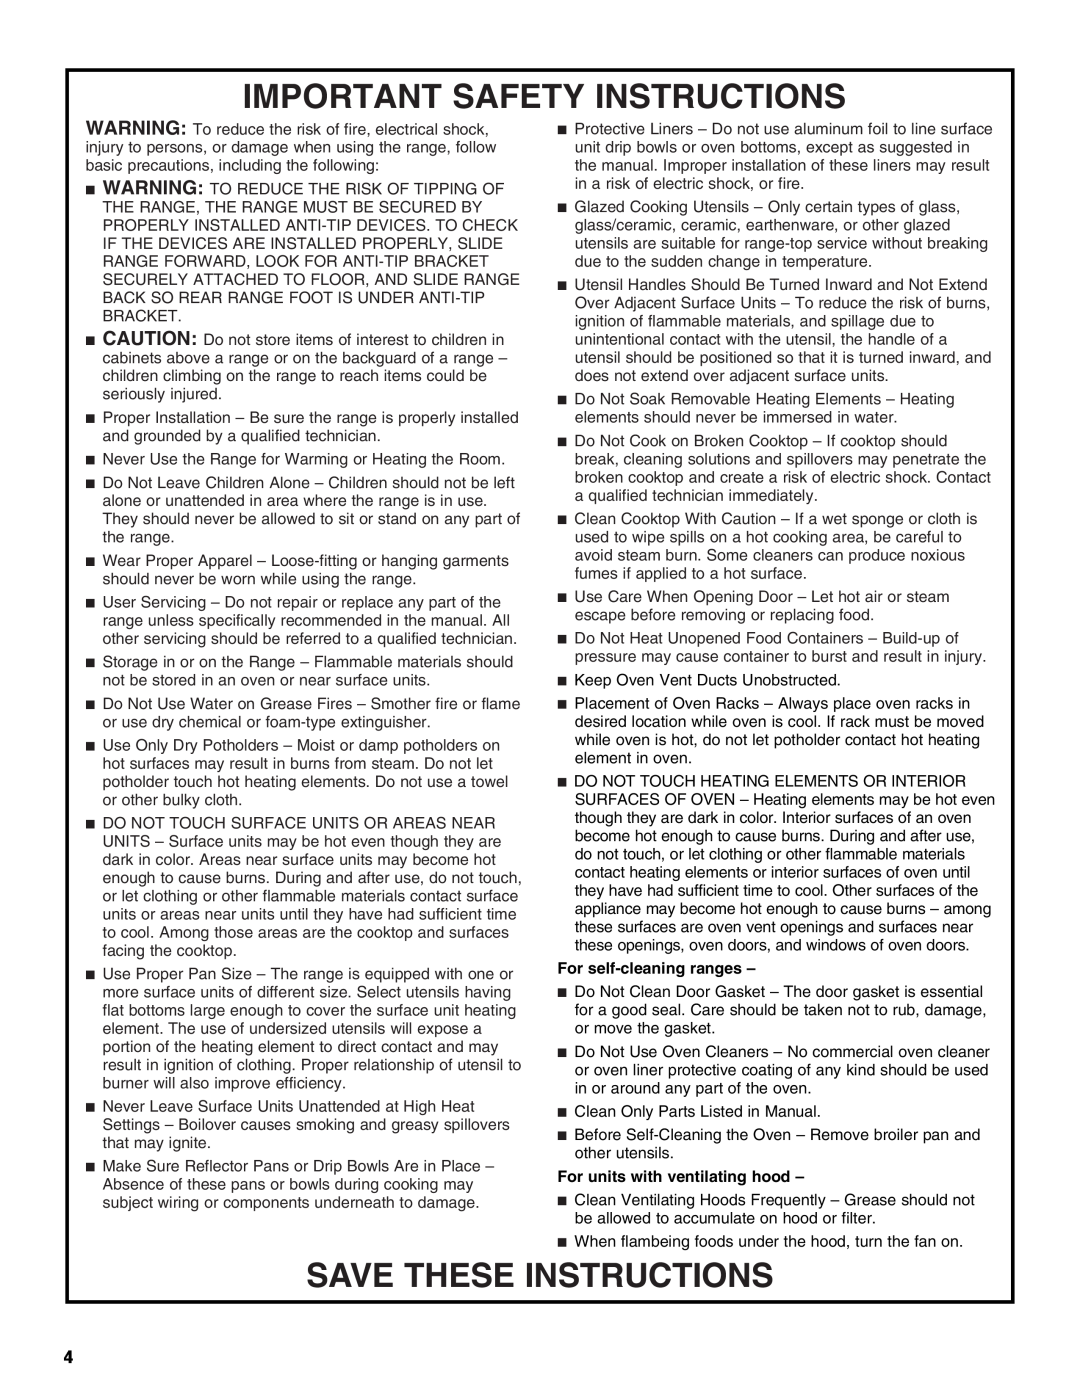 Inglis Home Appliances W10017680 manual Important Safety Instructions, Save These Instructions, For self-cleaningranges 